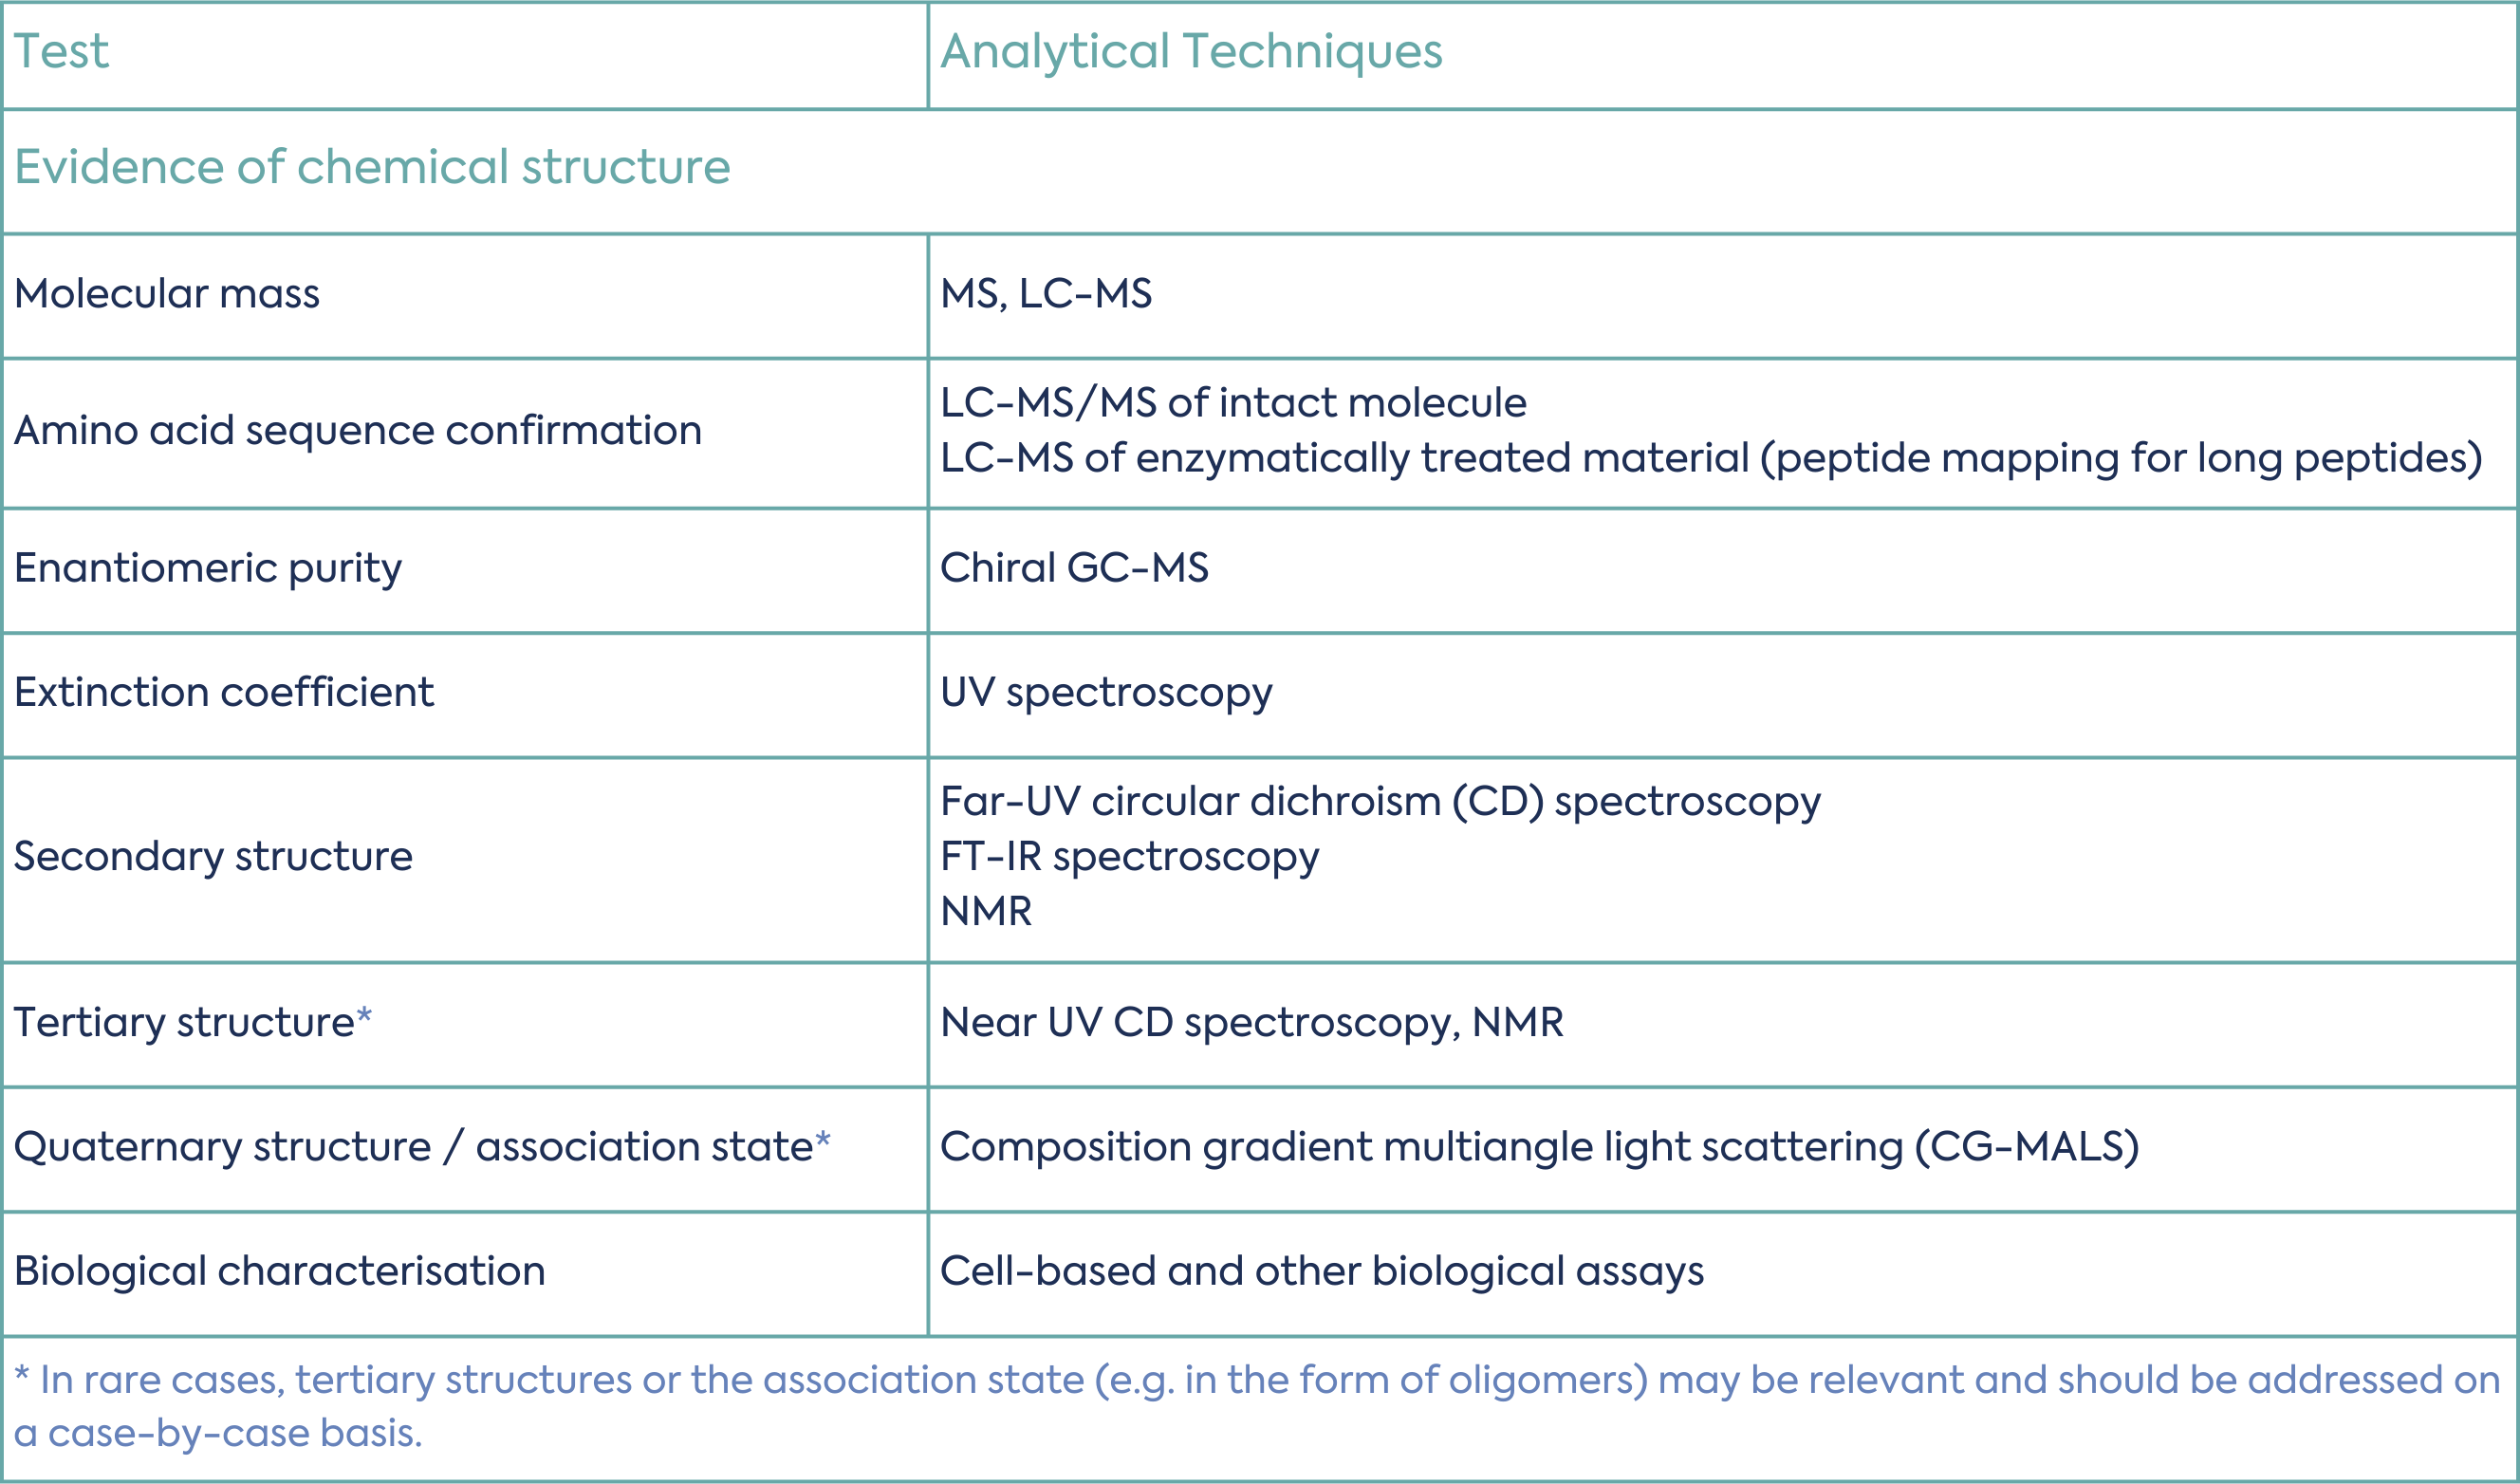 Table 1 – List of Tests and Analytical Techniques used for Synthetic Peptides Characterisation